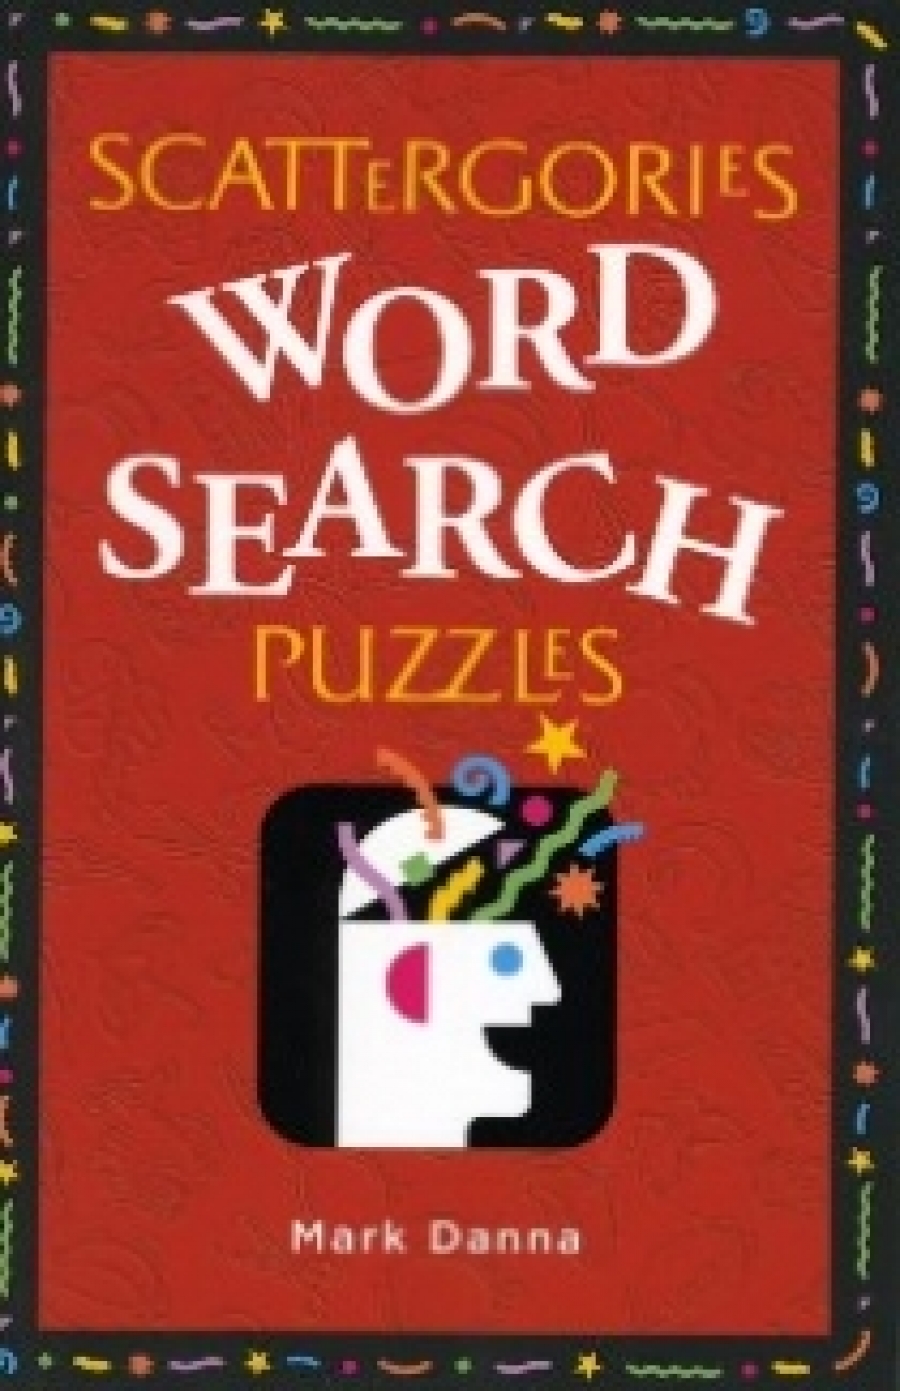 Mark, Danna SCATTERGORIES Word Search Puzzles 